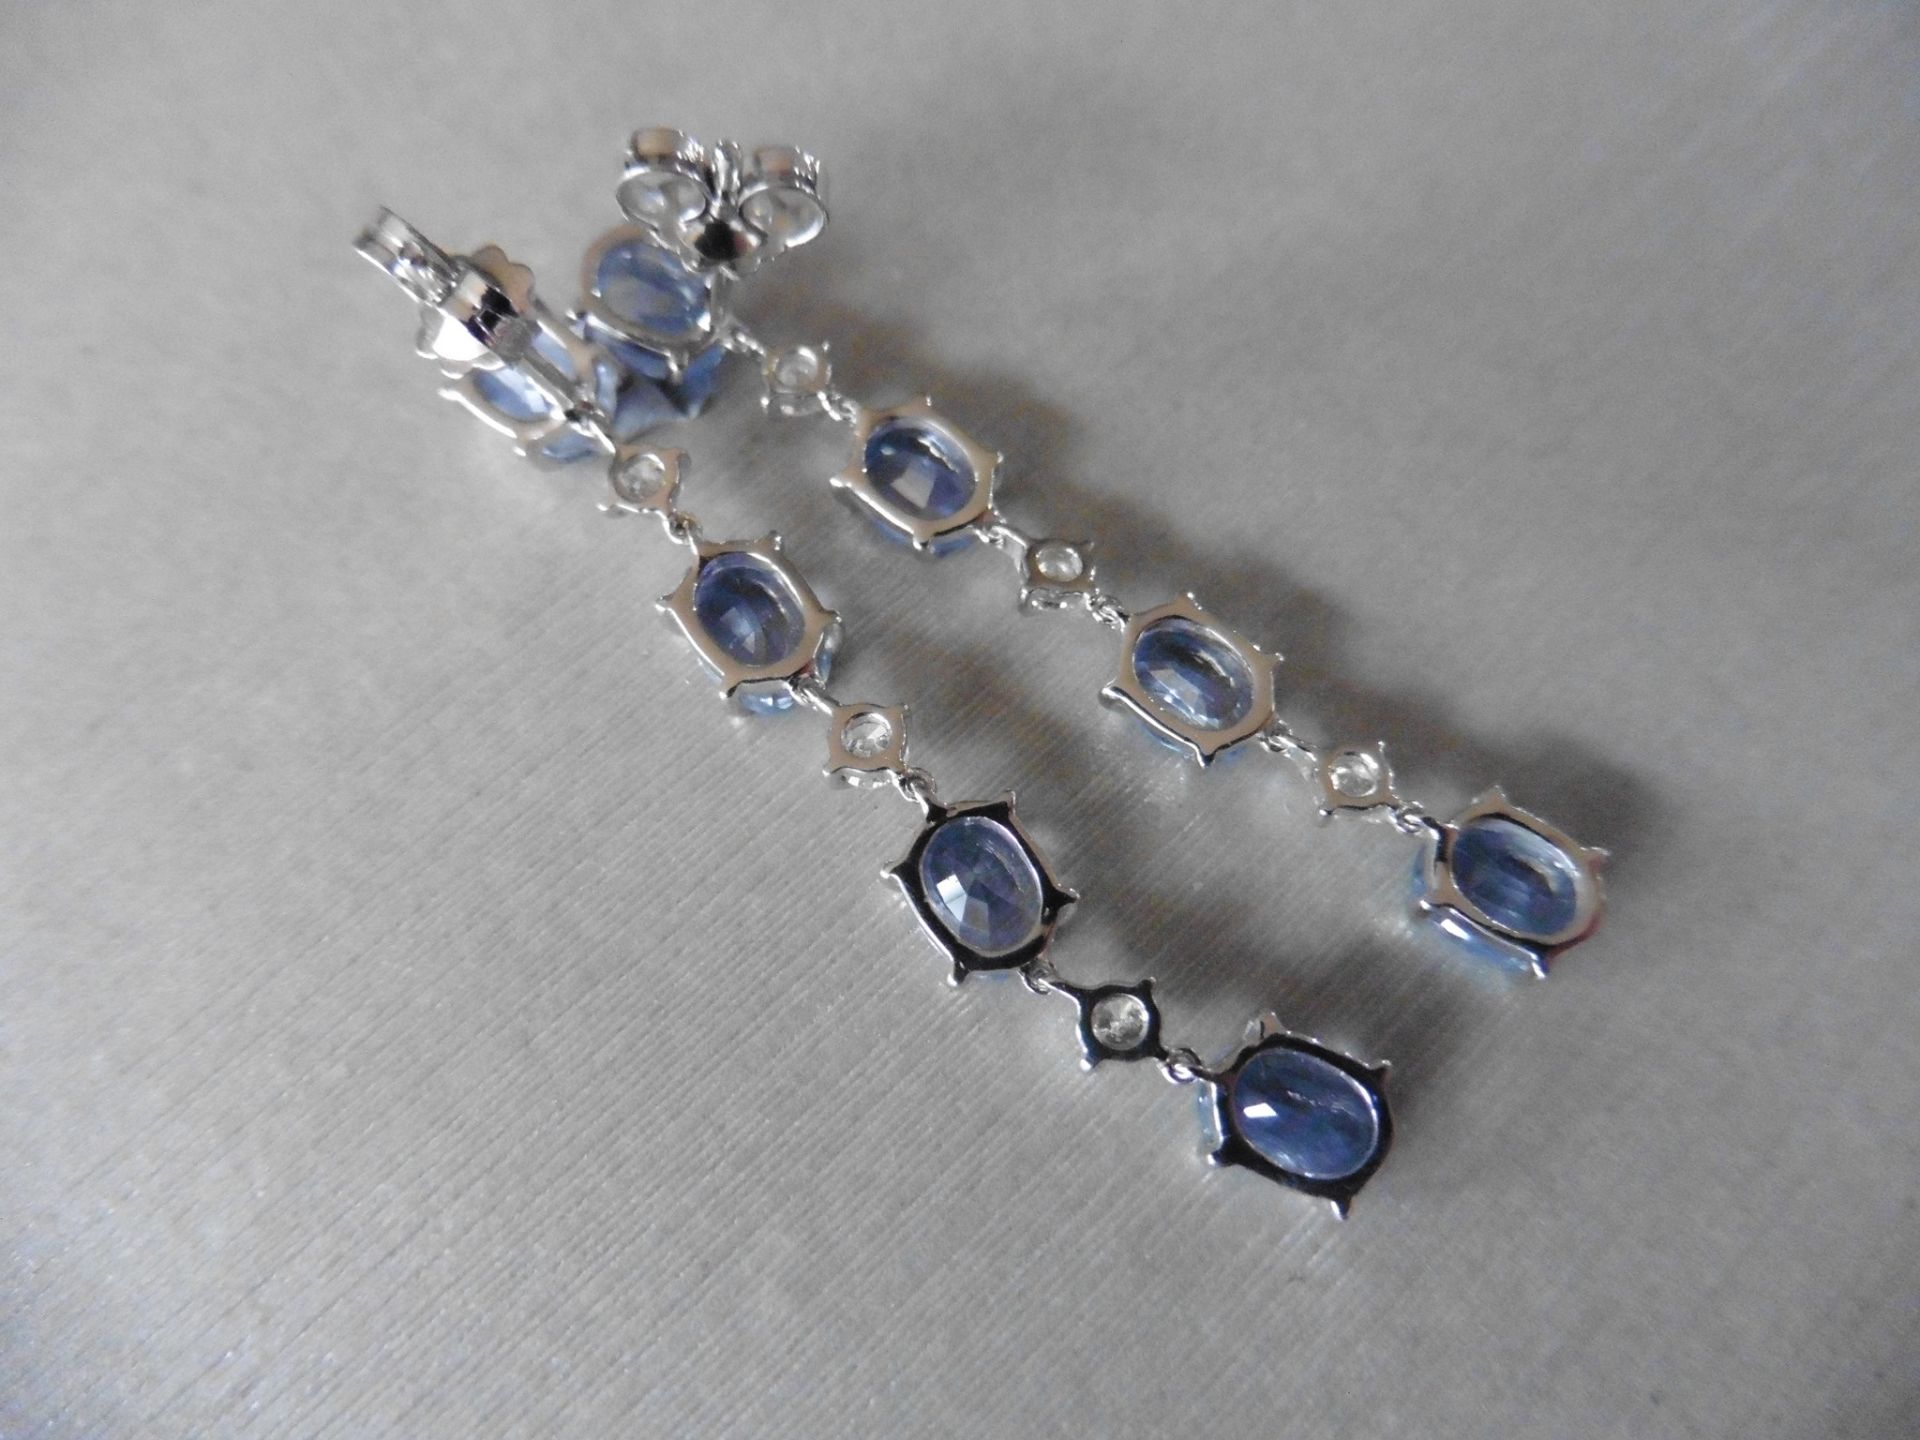 3ct ceylon sapphire and diamond drop earrings. Each set with 4 oval cut sapphires and 3 brilliant - Image 2 of 5